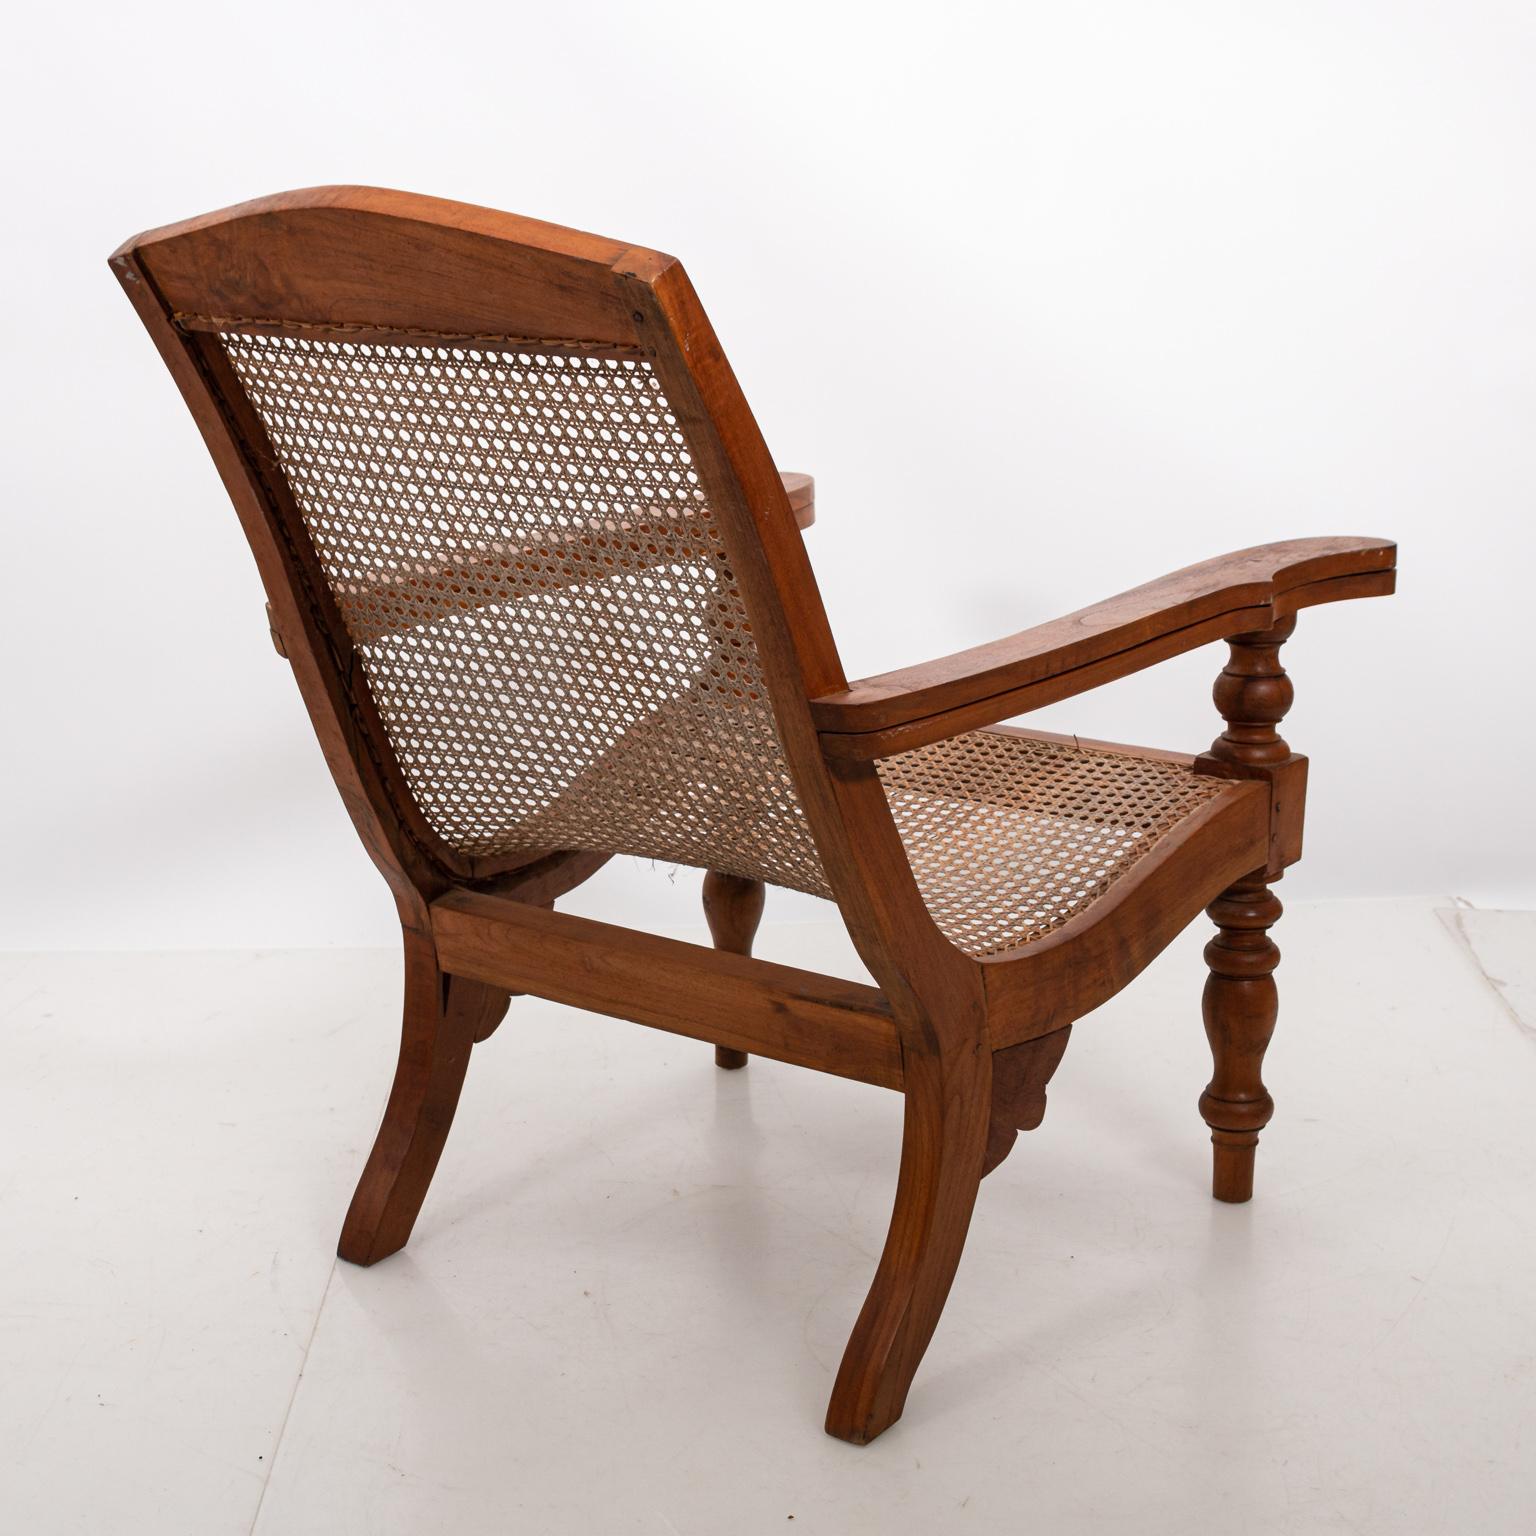 Anglo-Indian Teakwood and Cane Plantation Chair  3